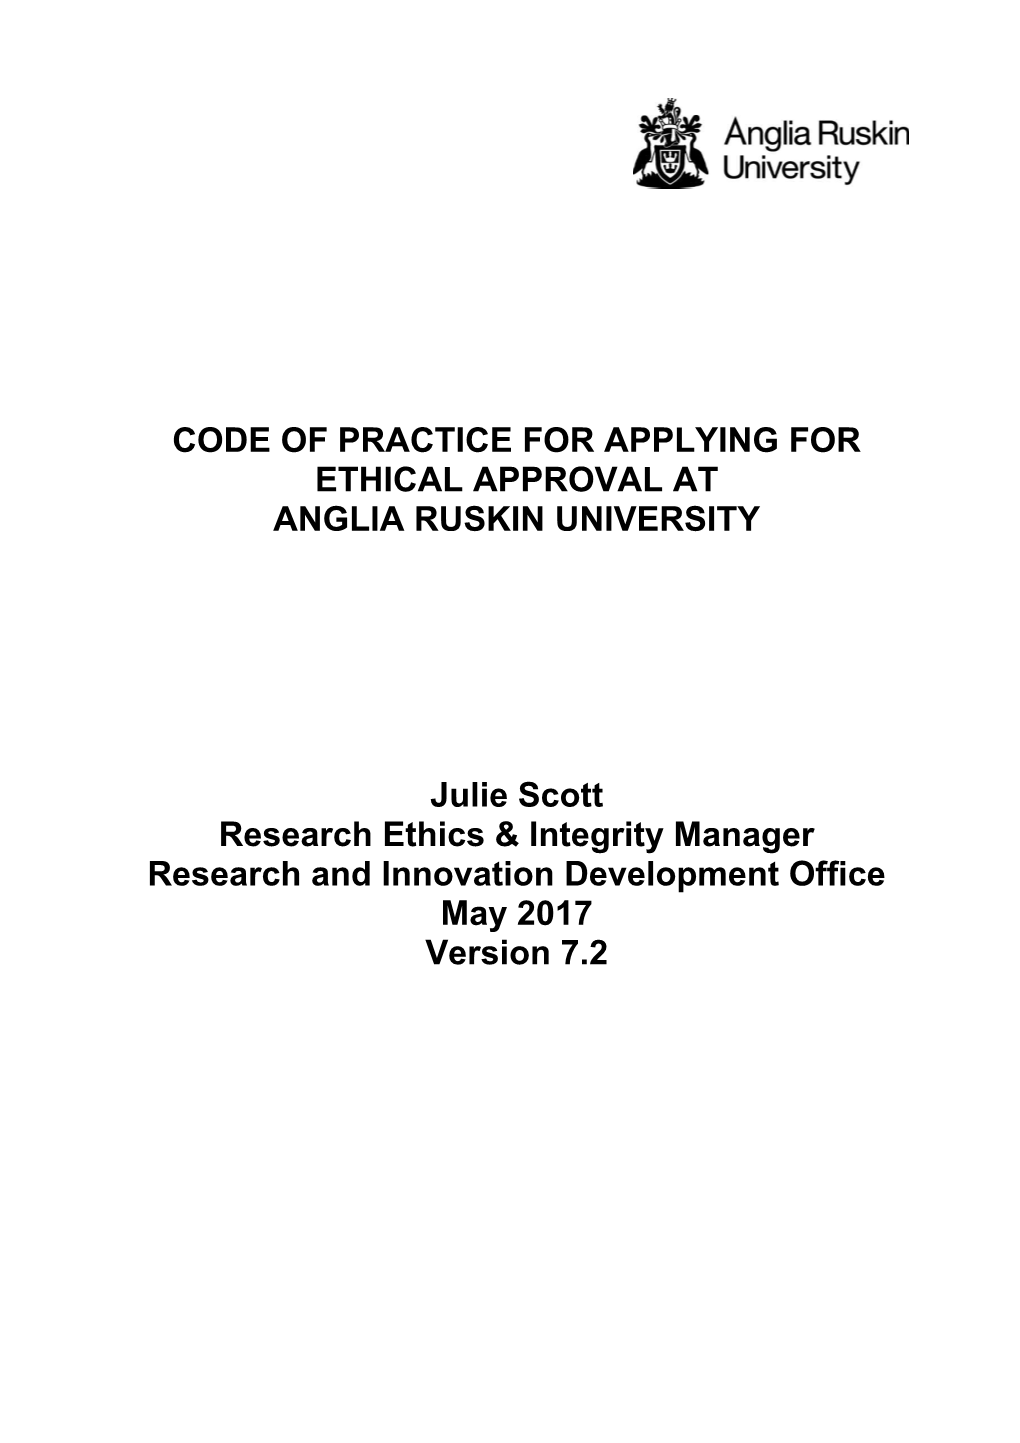 Code of Practice for Applying for Ethical Approval At